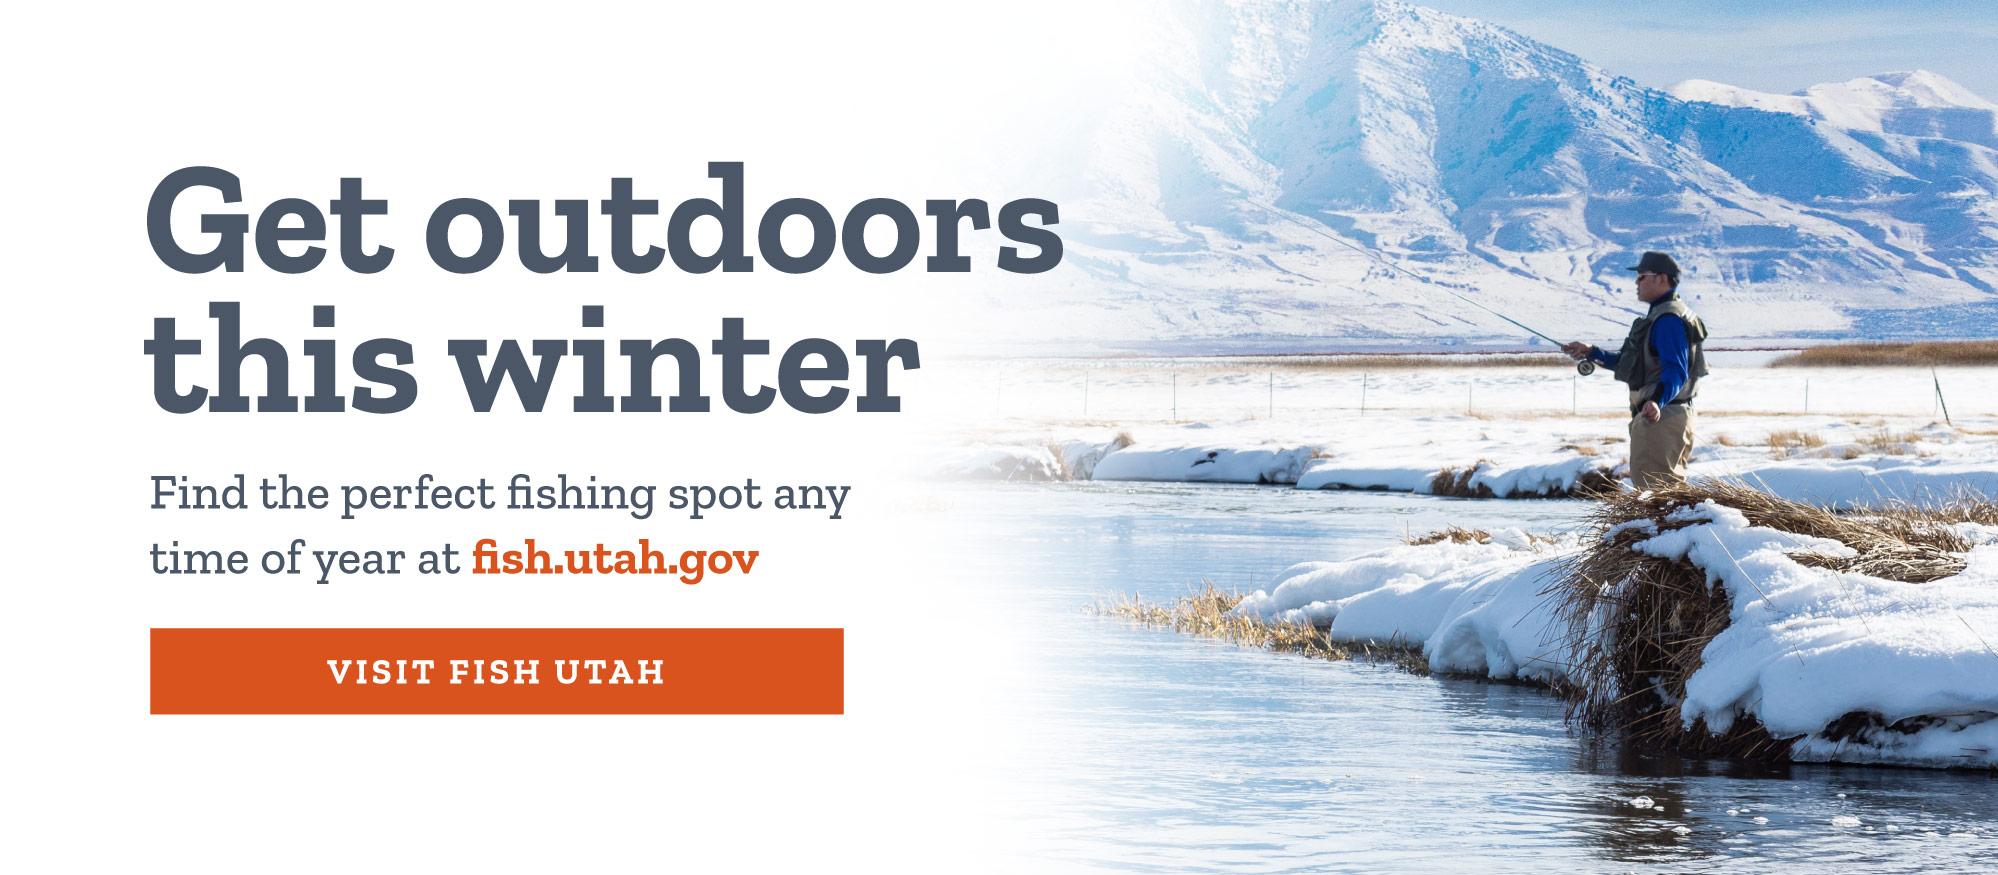 Get outdoors this winter